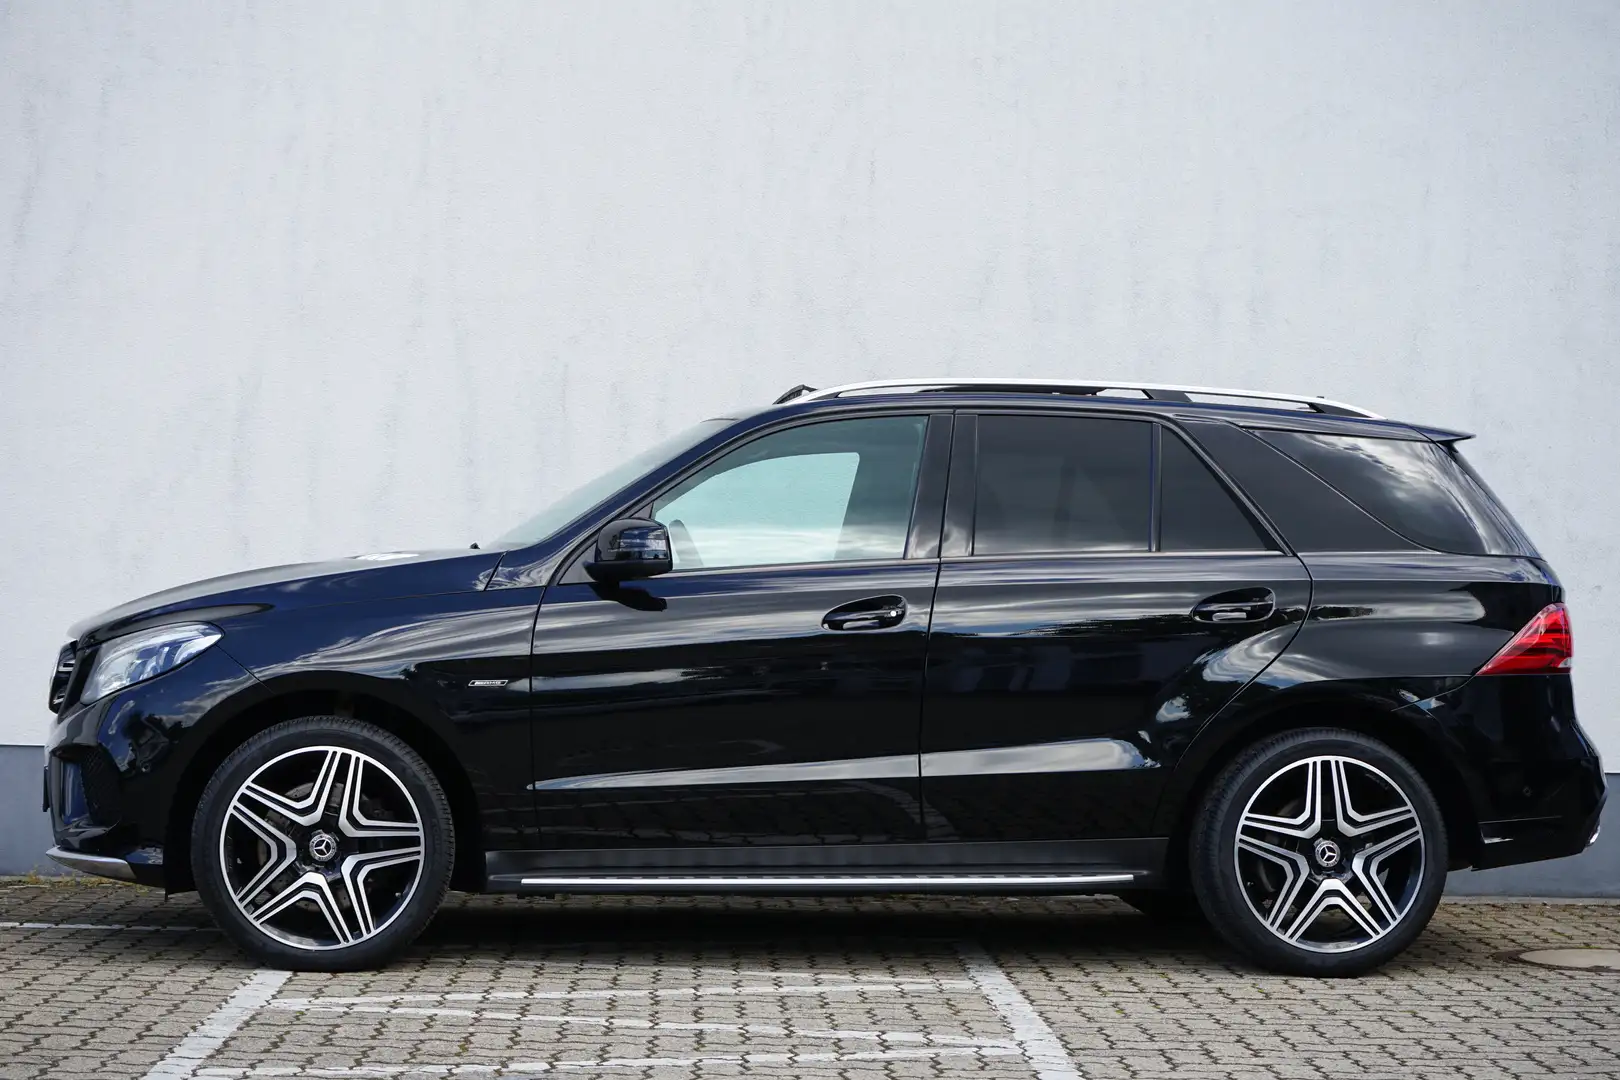 Mercedes-Benz GLE 450 4MATIC*21 Zoll*Panorama*LED ILS*Standheizung*Voll Schwarz - 2